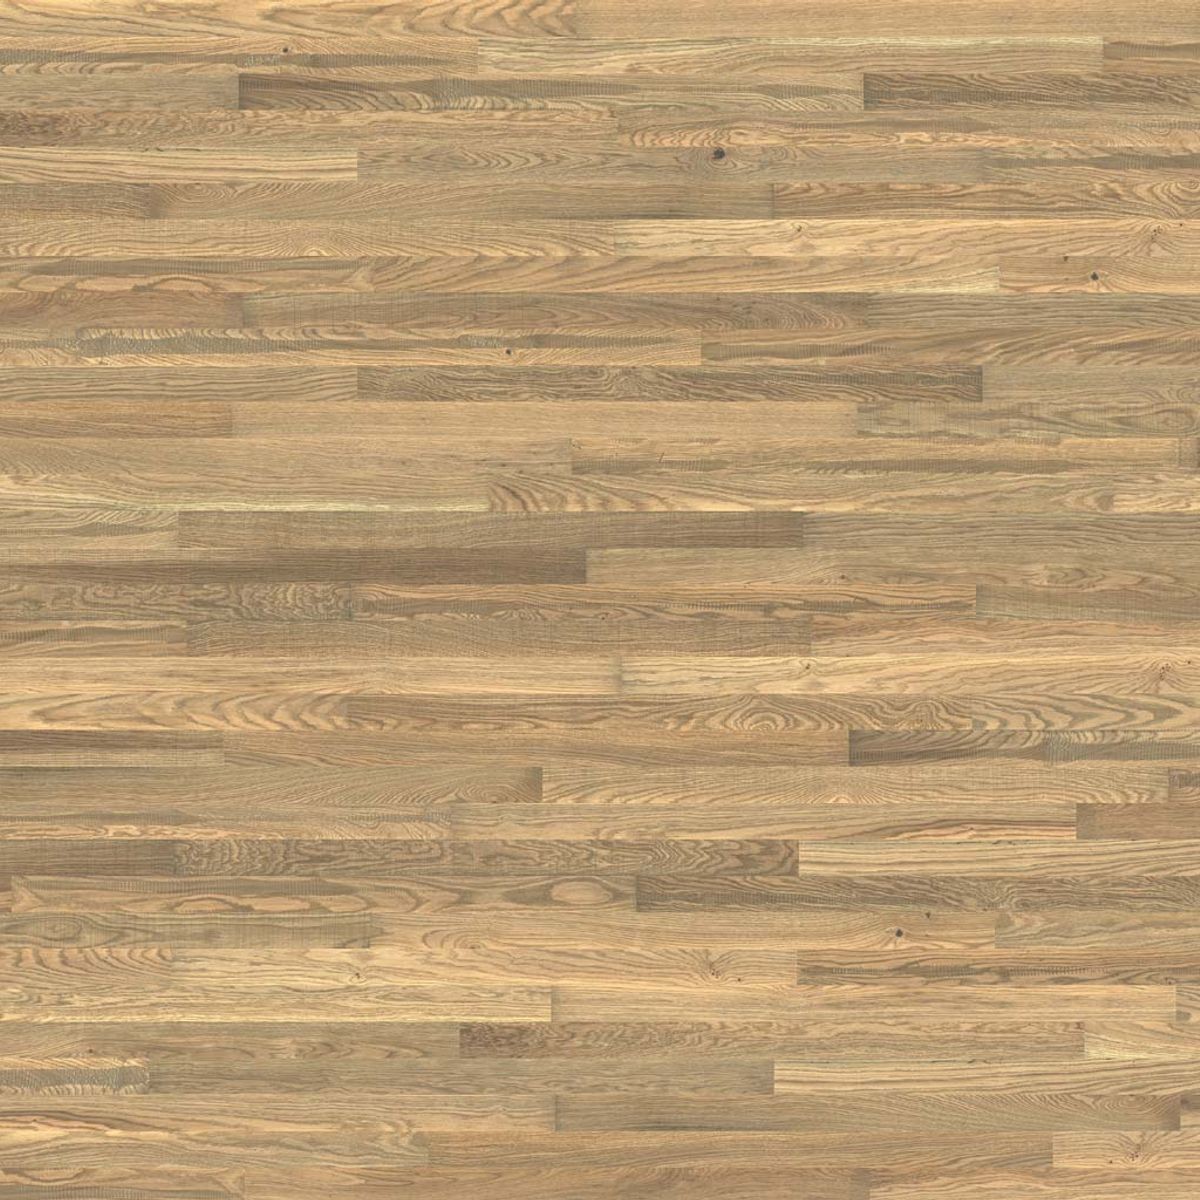 Dusty Brown Timber Flooring Archipro Nz